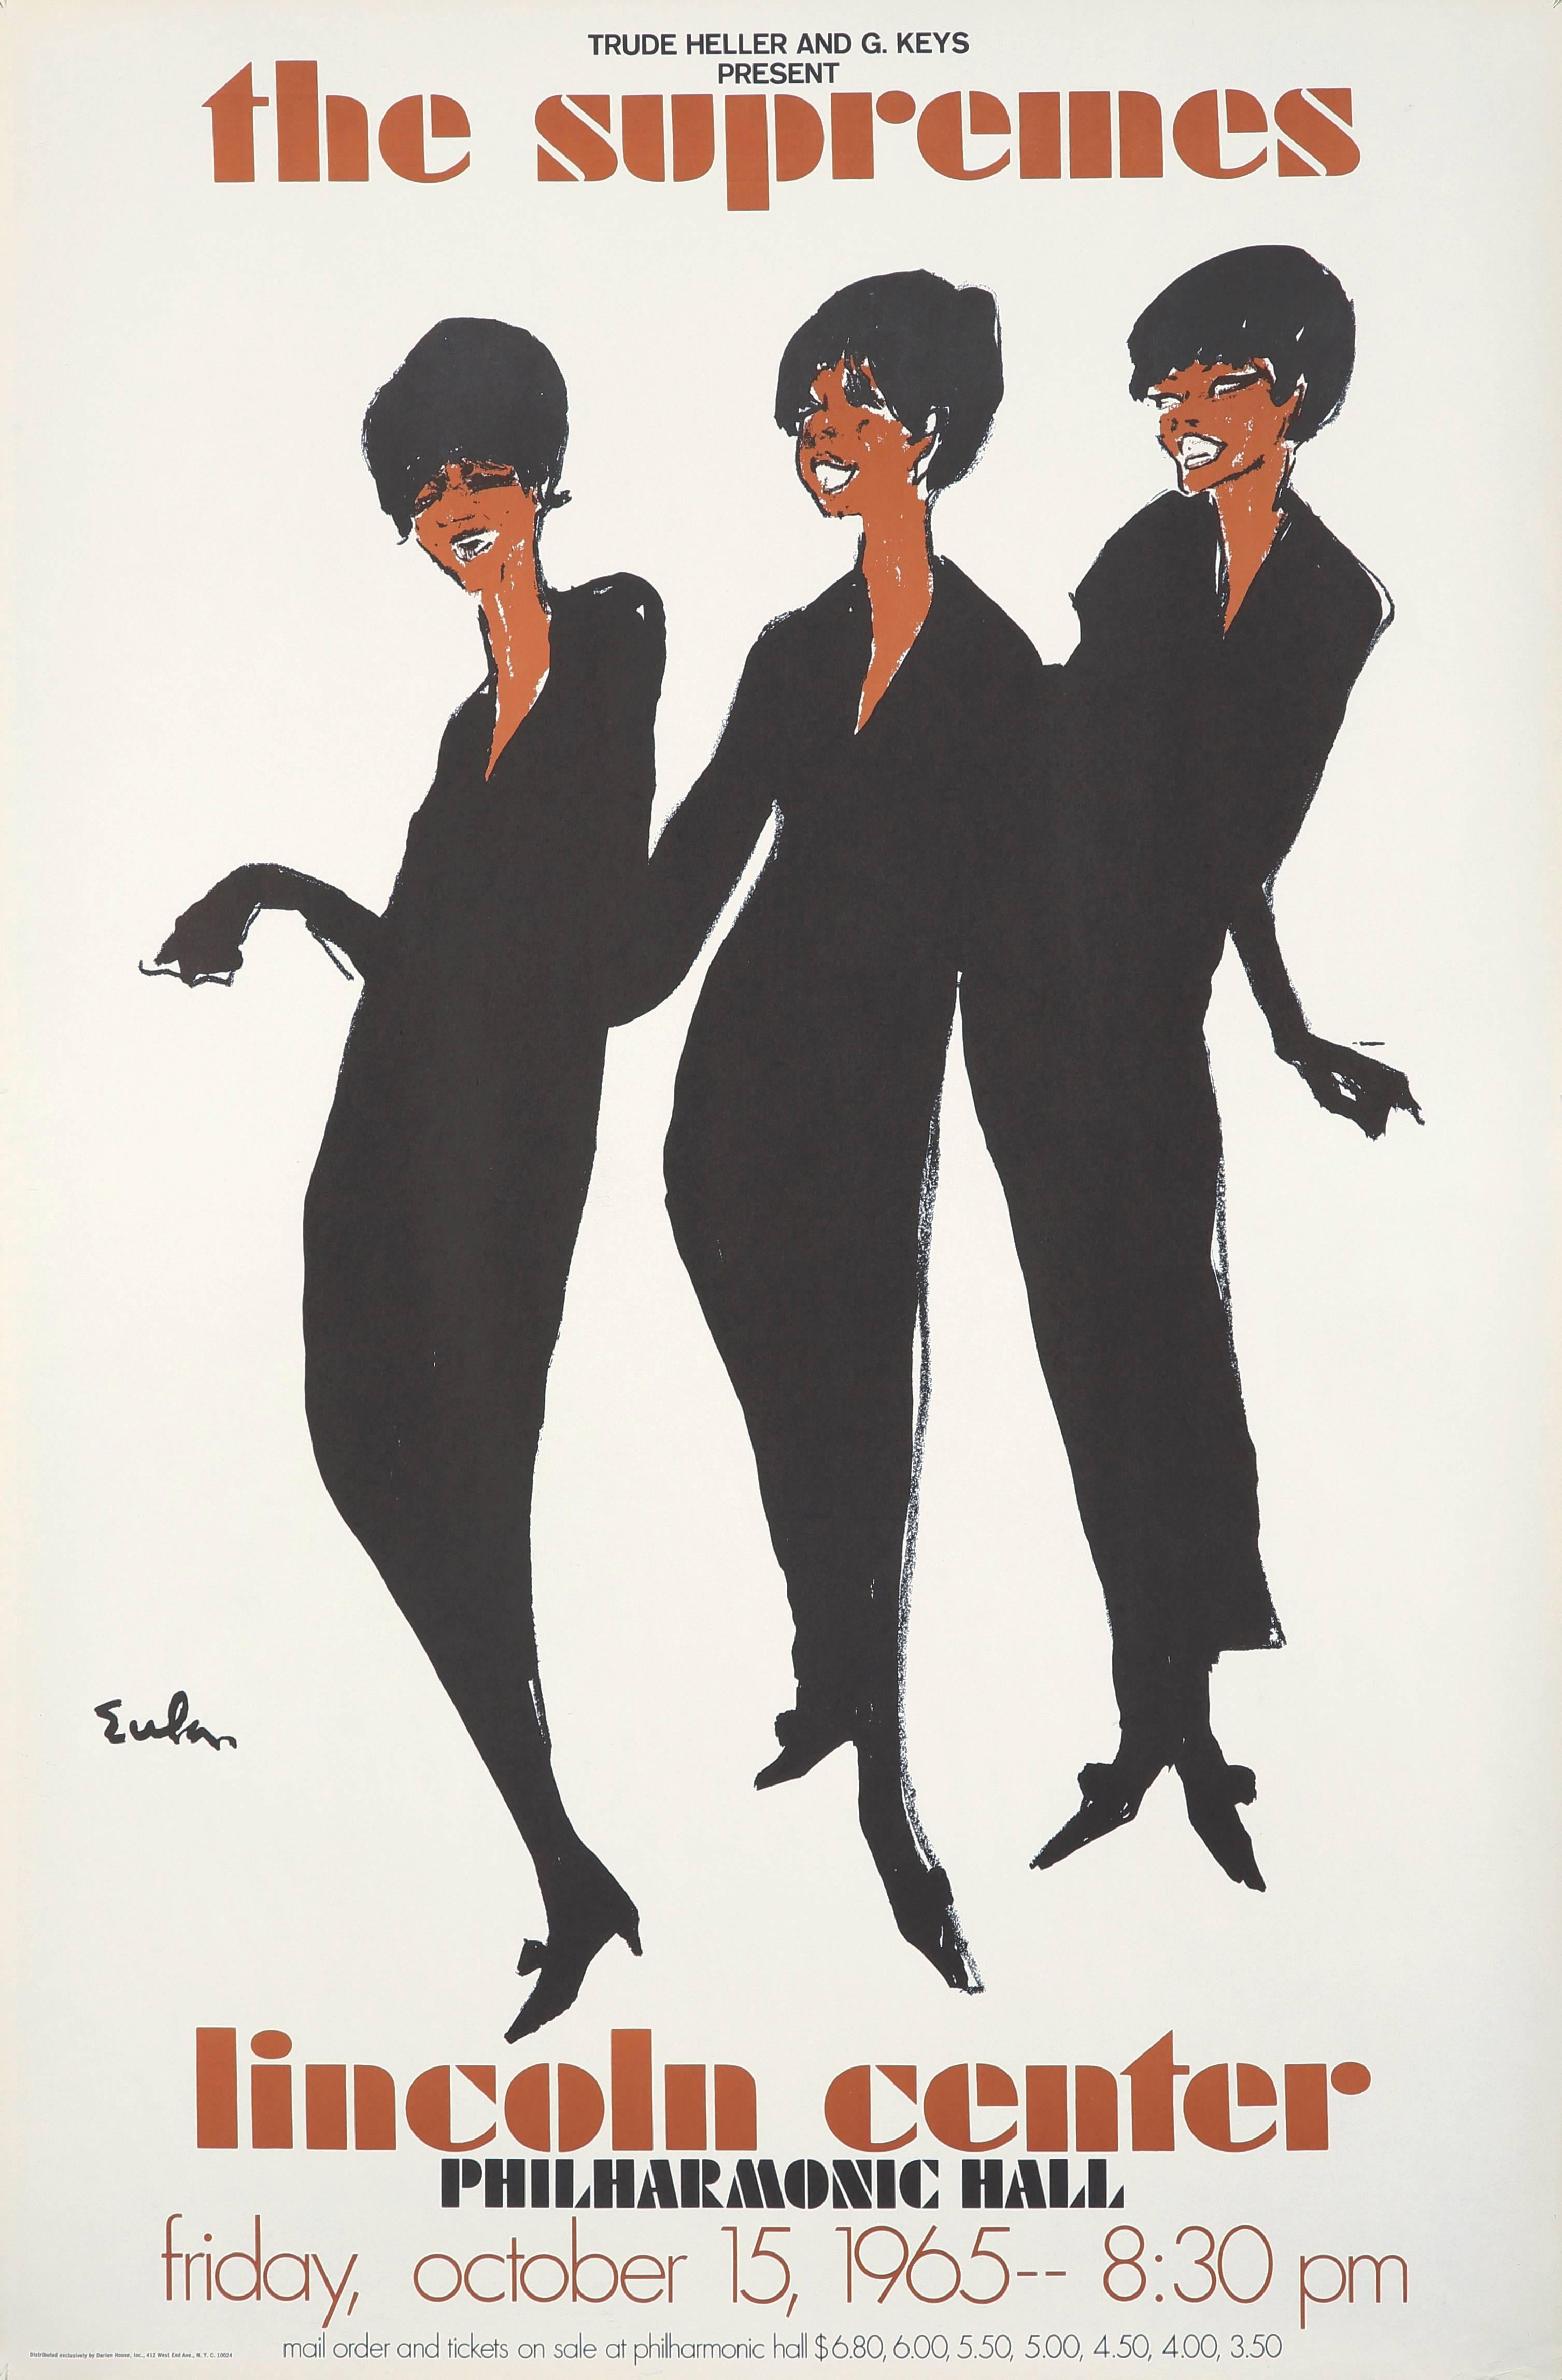 Joe Eula, vintage original The Supremes promo poster
Among Eula's most famous illustrations, this fashionable and soulful work was published in 1965 to publicize the legendary Motown group's concert at Lincoln Center (10/15/65)

Off-set lithograph